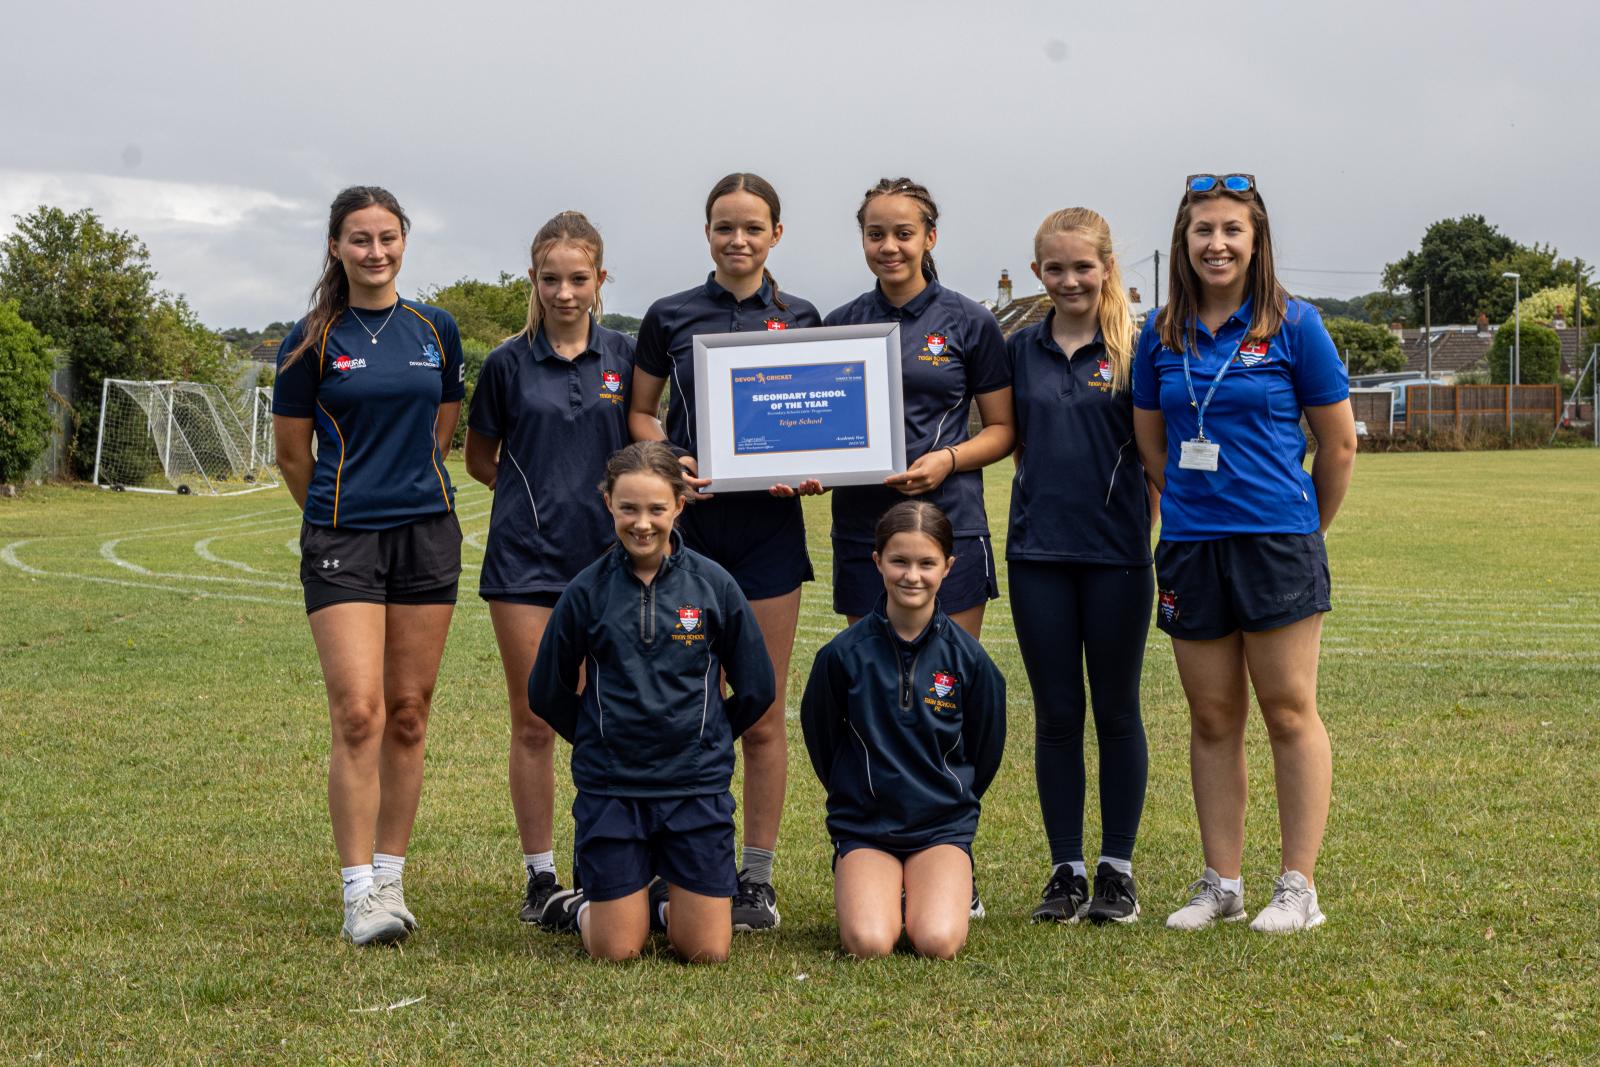 It was amazing to have a Devon Cricket coach in at Teign School as it has ignited interest in girls' cricket with so many students from the project inspired, and now continuing with cricket club even into the winter term and playing regional and out of school competitions.